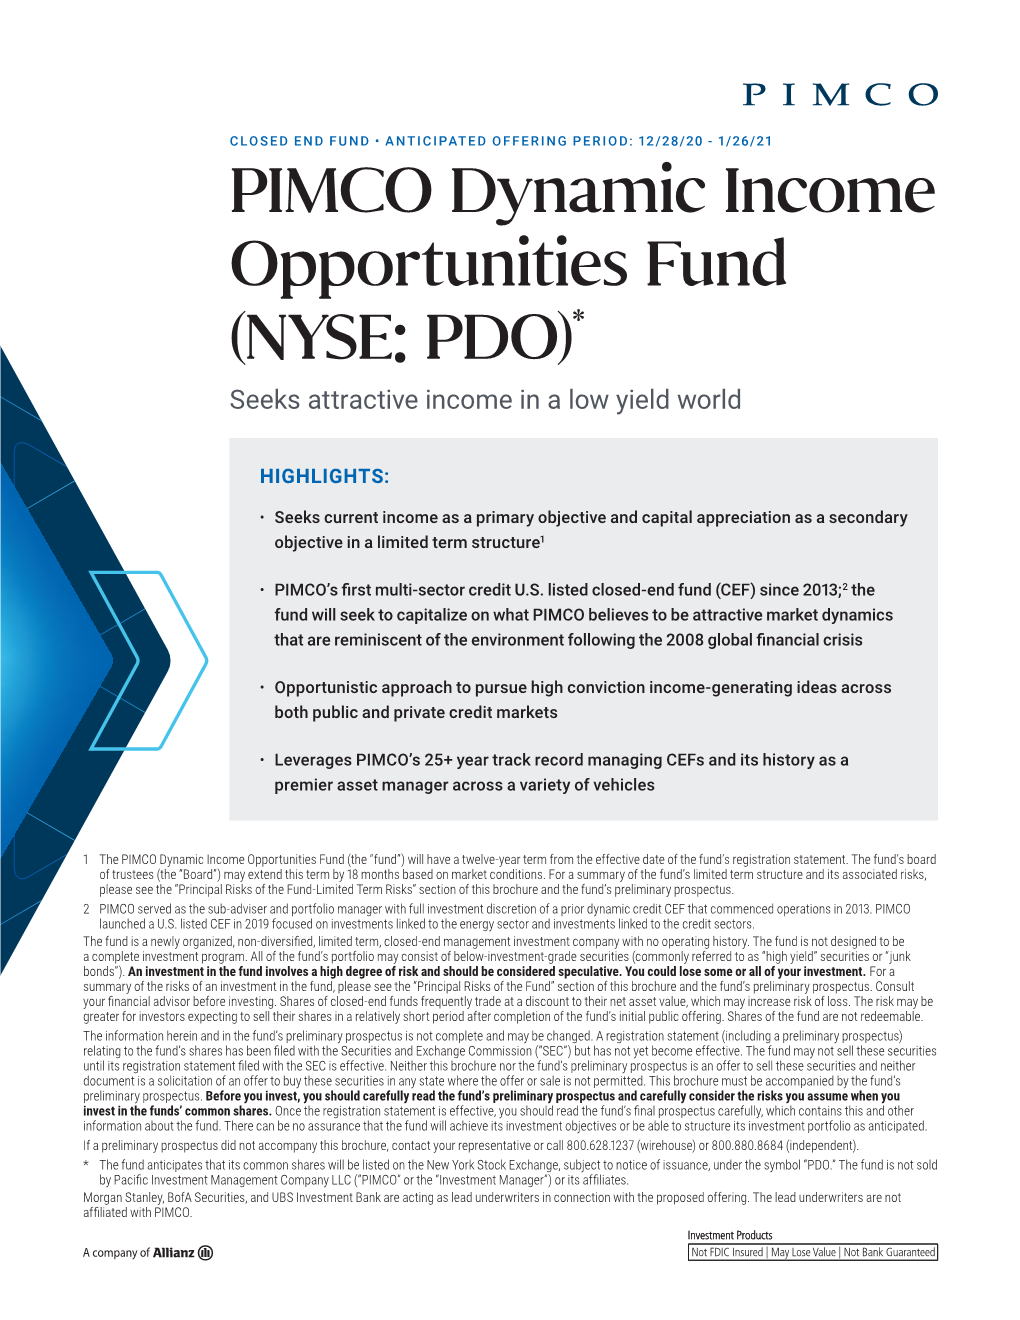 PIMCO Dynamic Income Opportunities Fund (NYSE: PDO)* Seeks Attractive Income in a Low Yield World